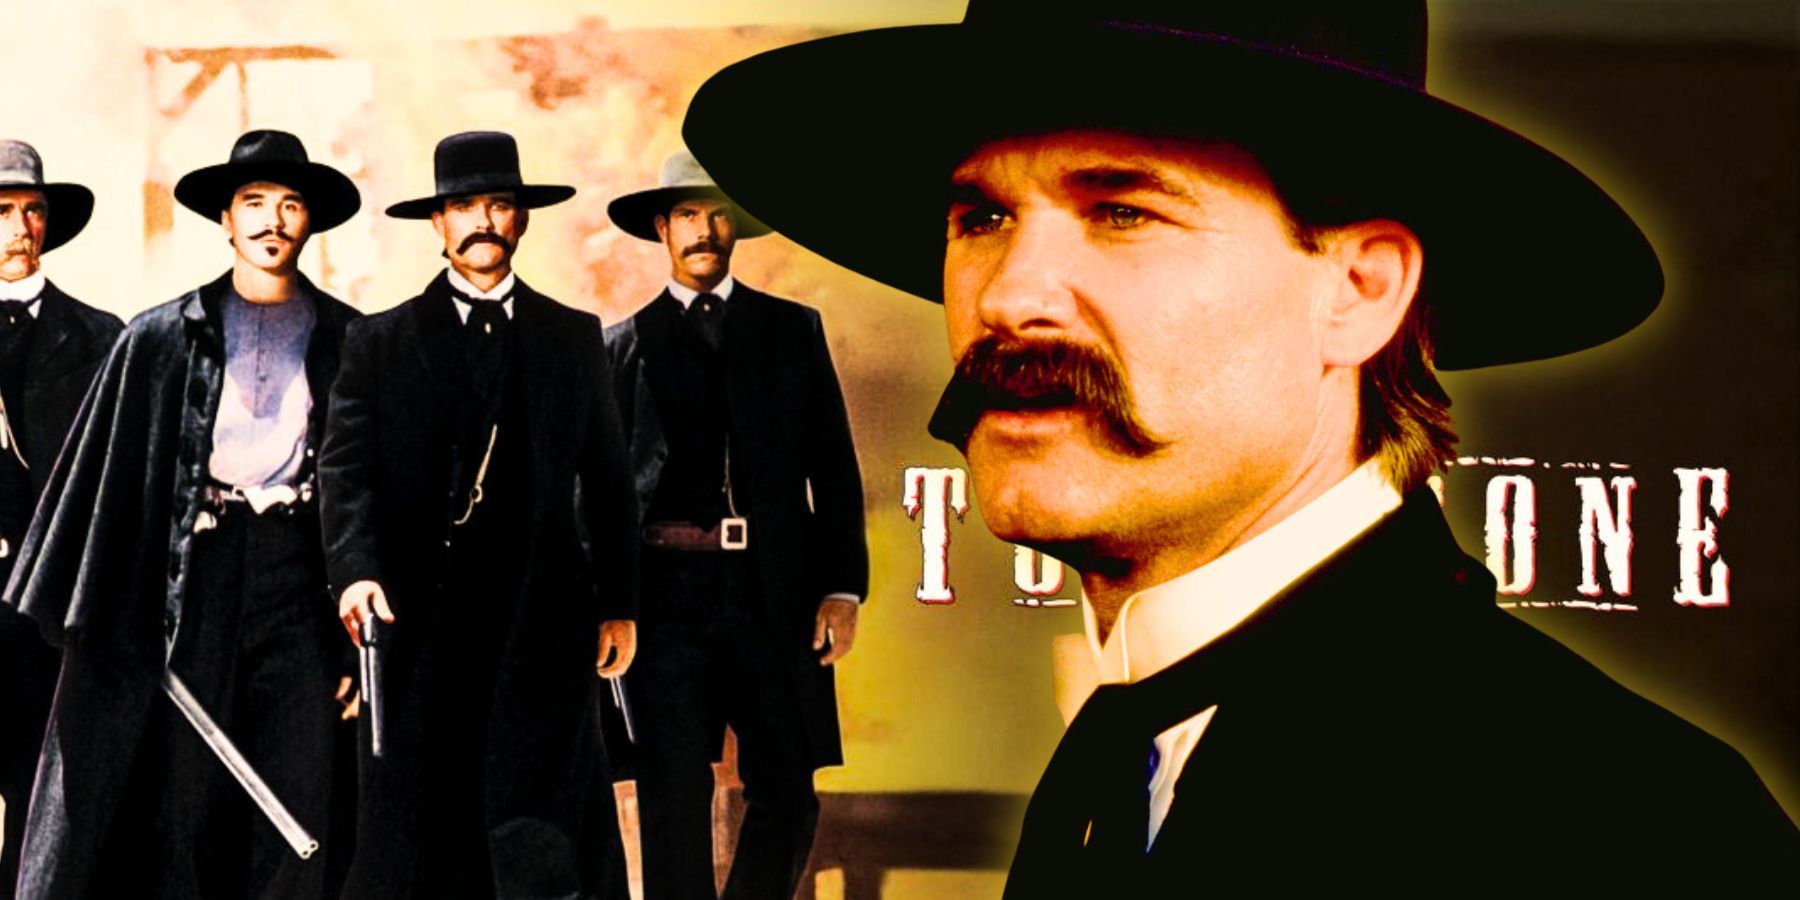 Kurt Russell in Tombstone with movie poster background